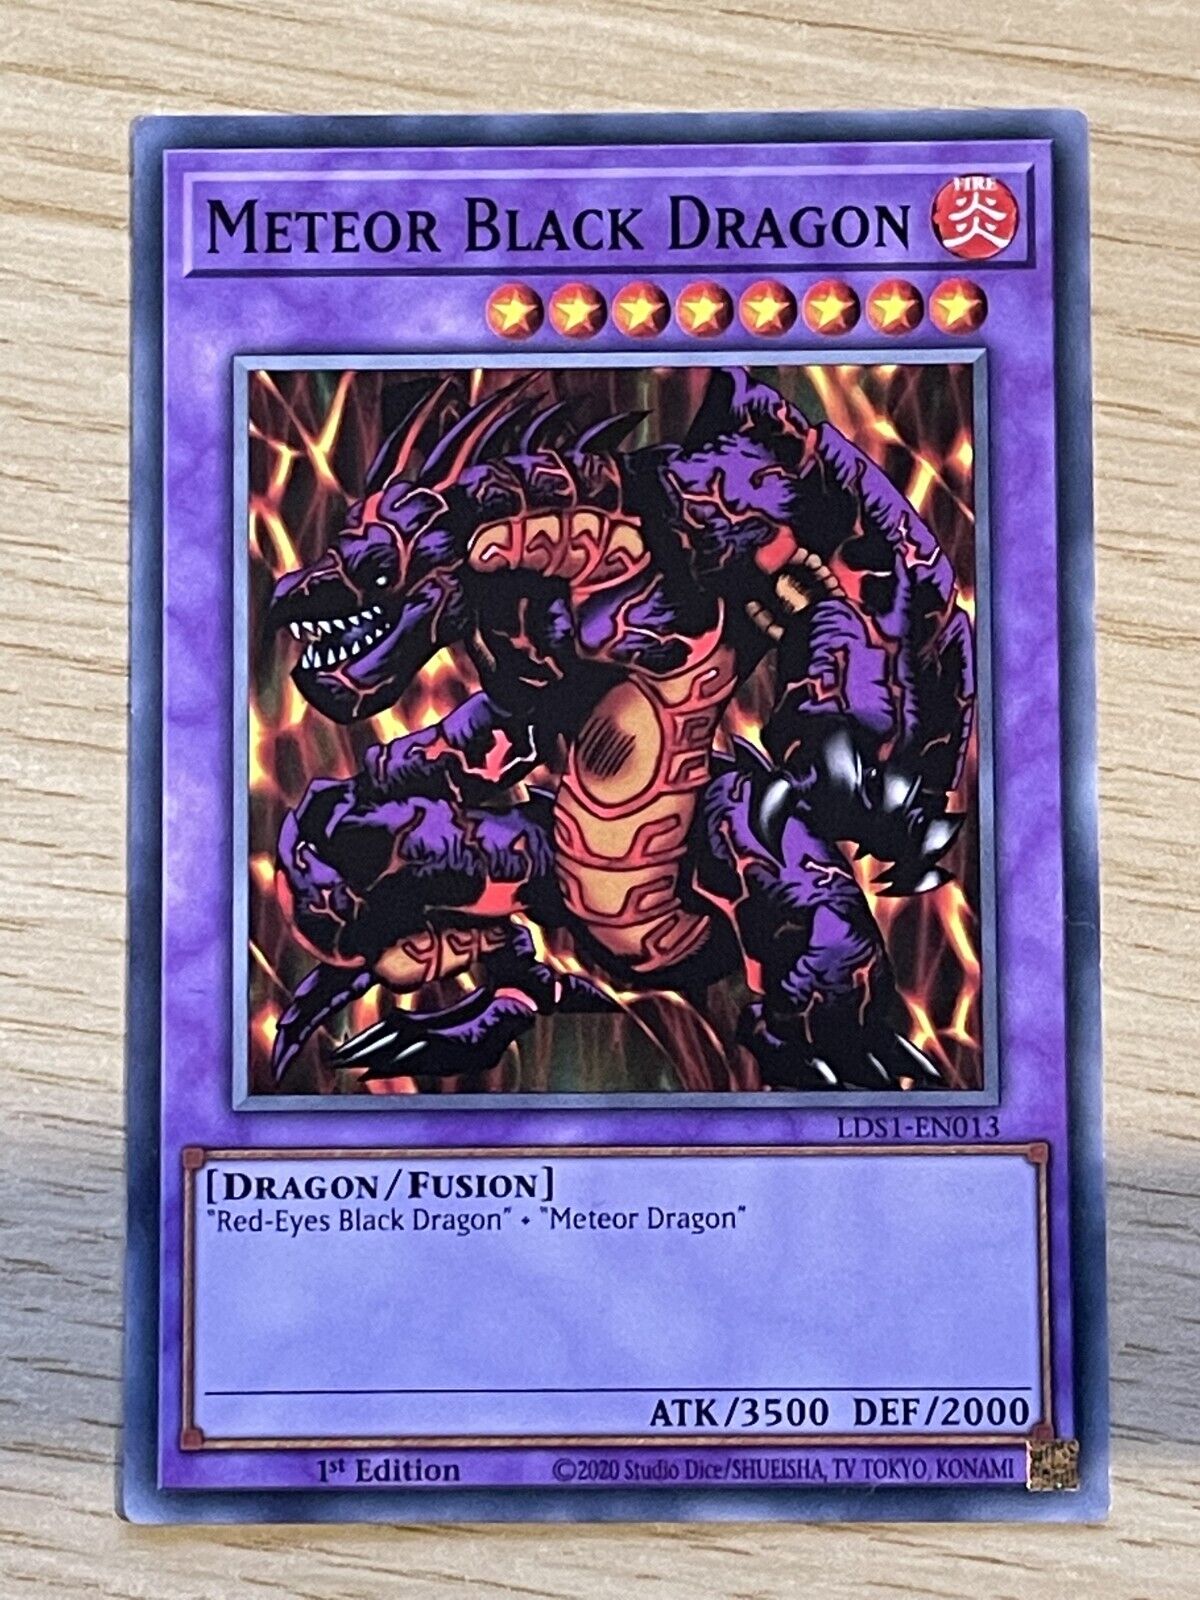 LDS1-EN013 Meteor Black Dragon | 1st Edition Common YuGiOh Trading Card Game TCG